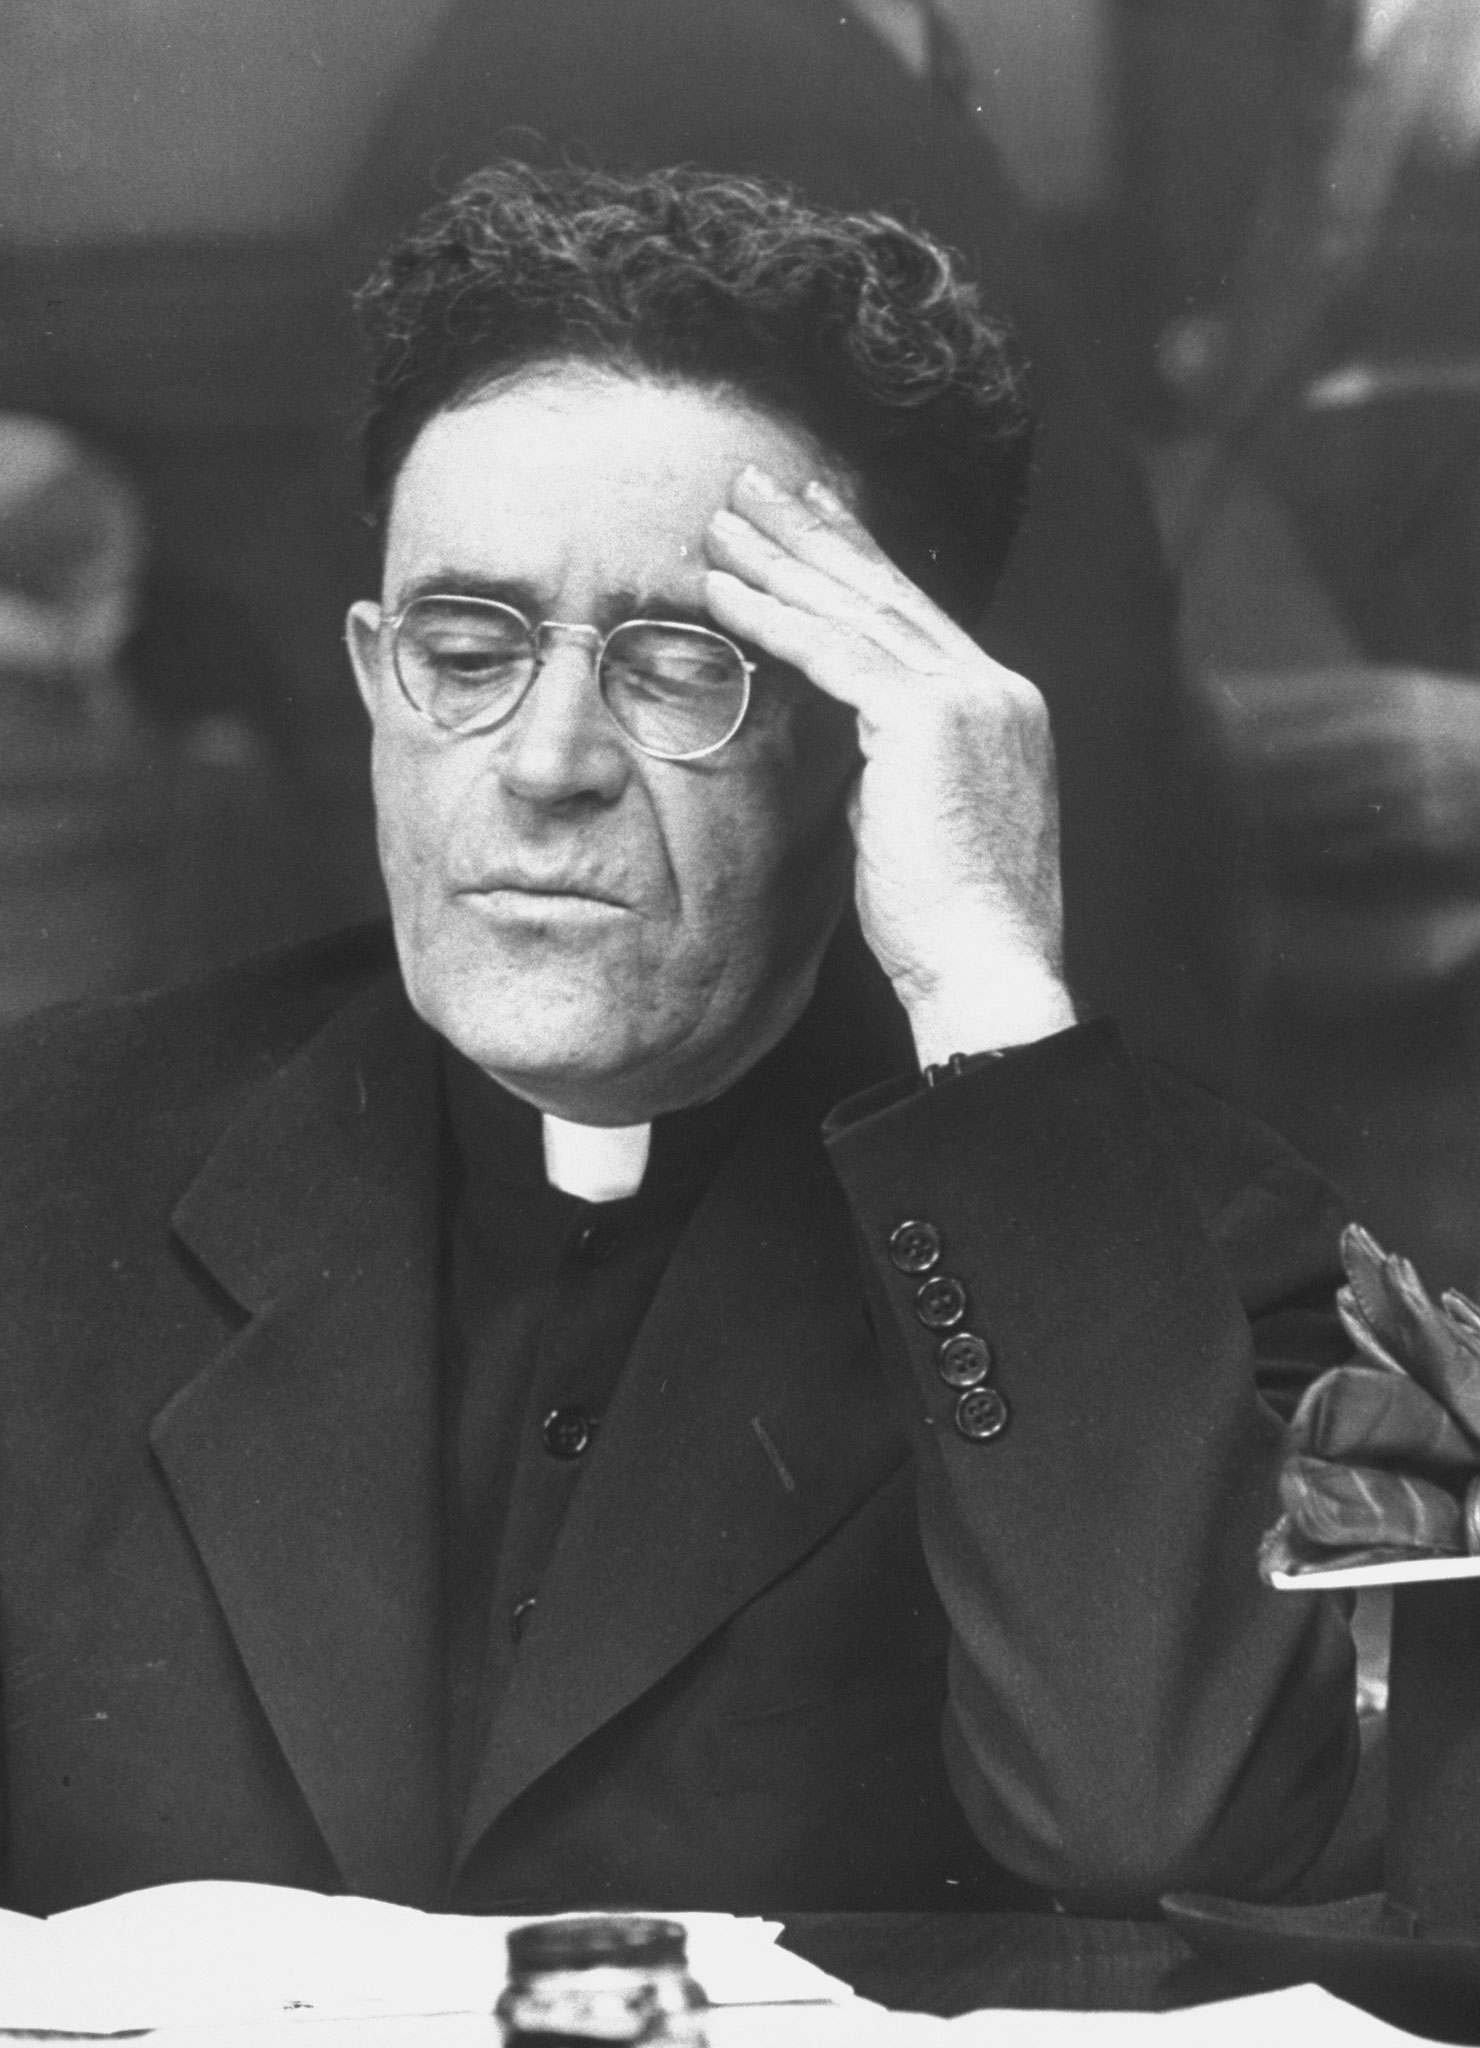 A priest at an Internal Revenue information center in New York in 1944.